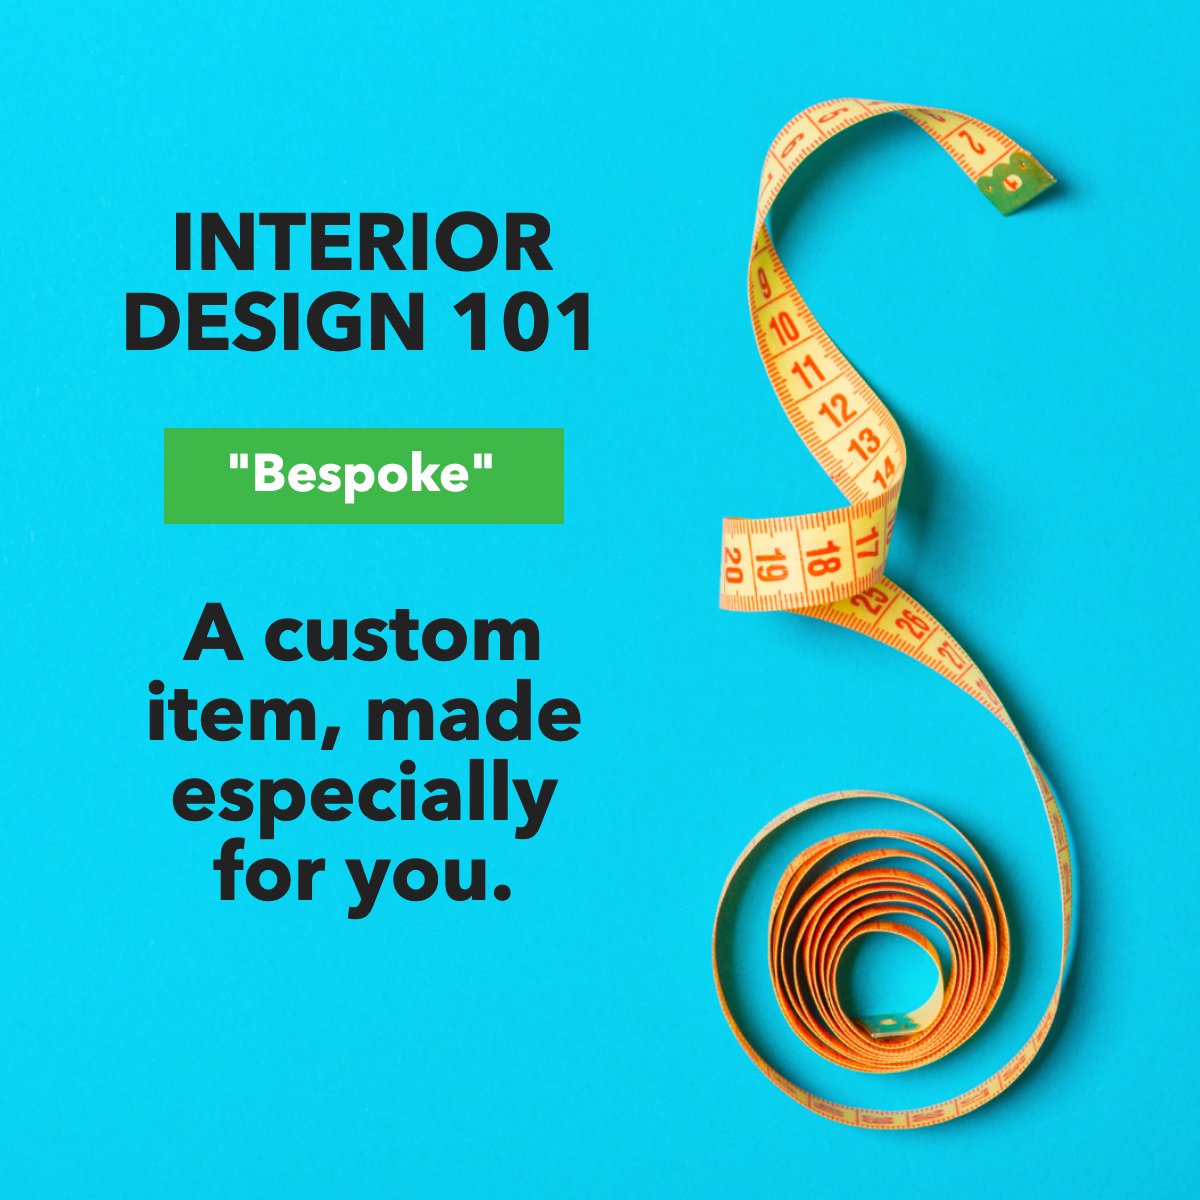 Have you ever ordered a custom item?

There is a specific term for custom items in interior design 

#interiorsdesign #interiortrends #interiordesigning #interiordesigntrends #interiorsaddict #interiordesigntips #interiordesigngoals